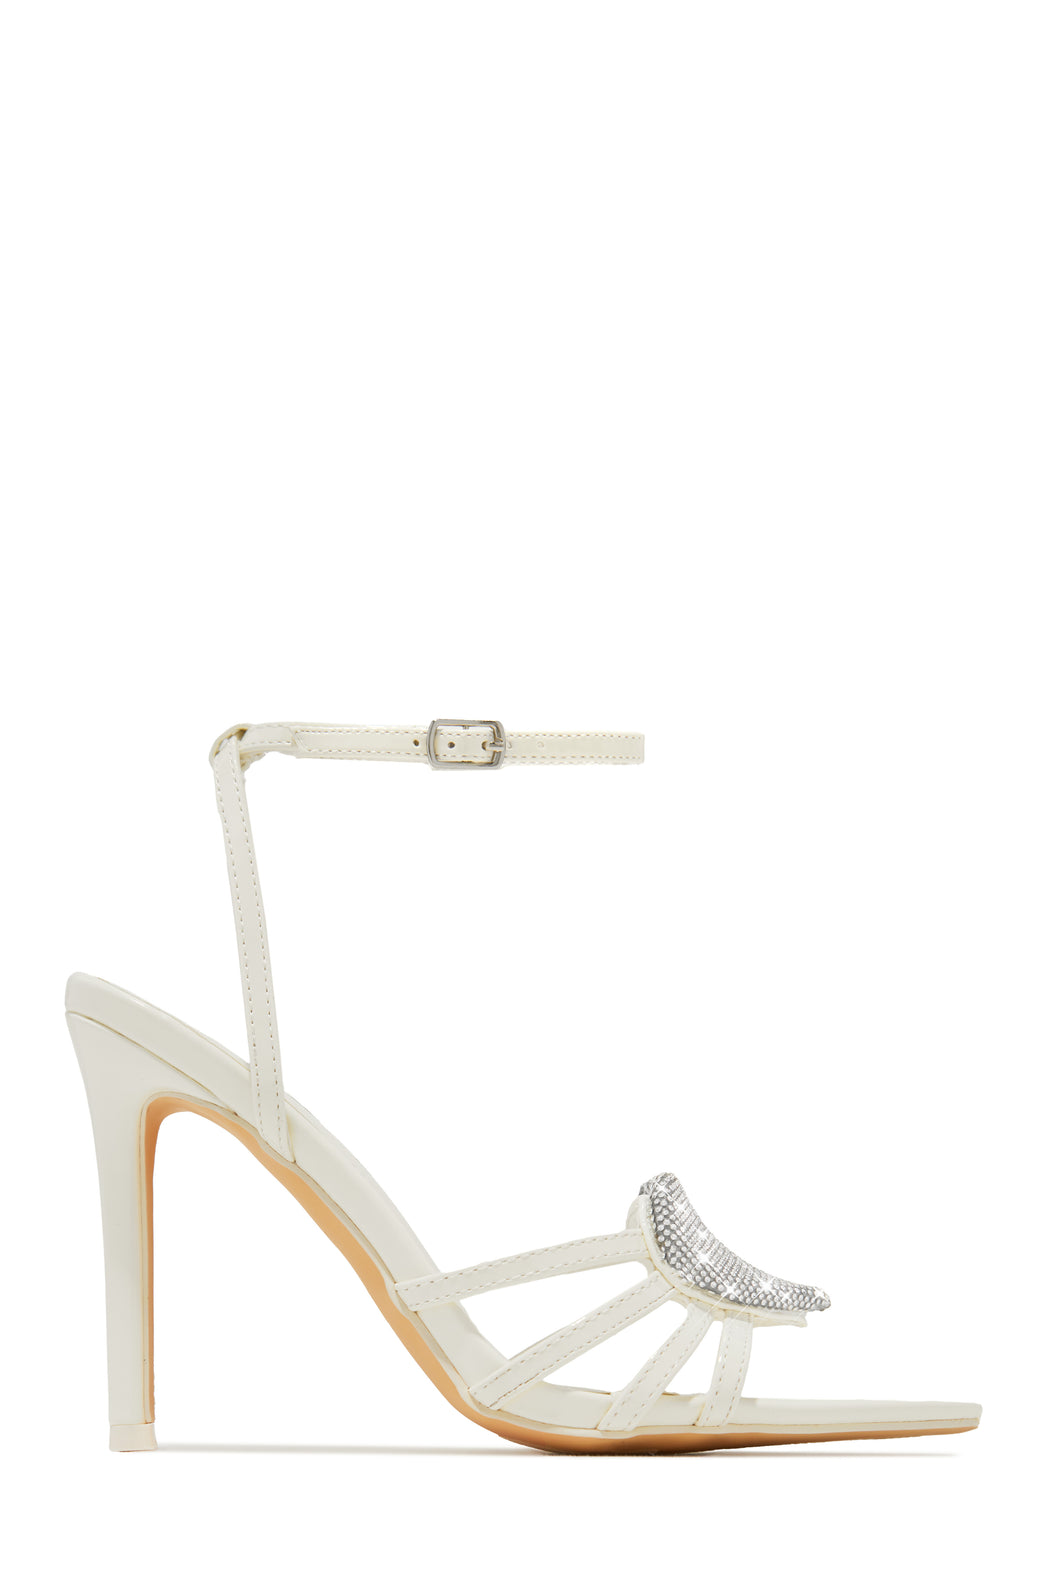 Ivory Strappy Single Sole High Heels with Embellished Heart Detailing